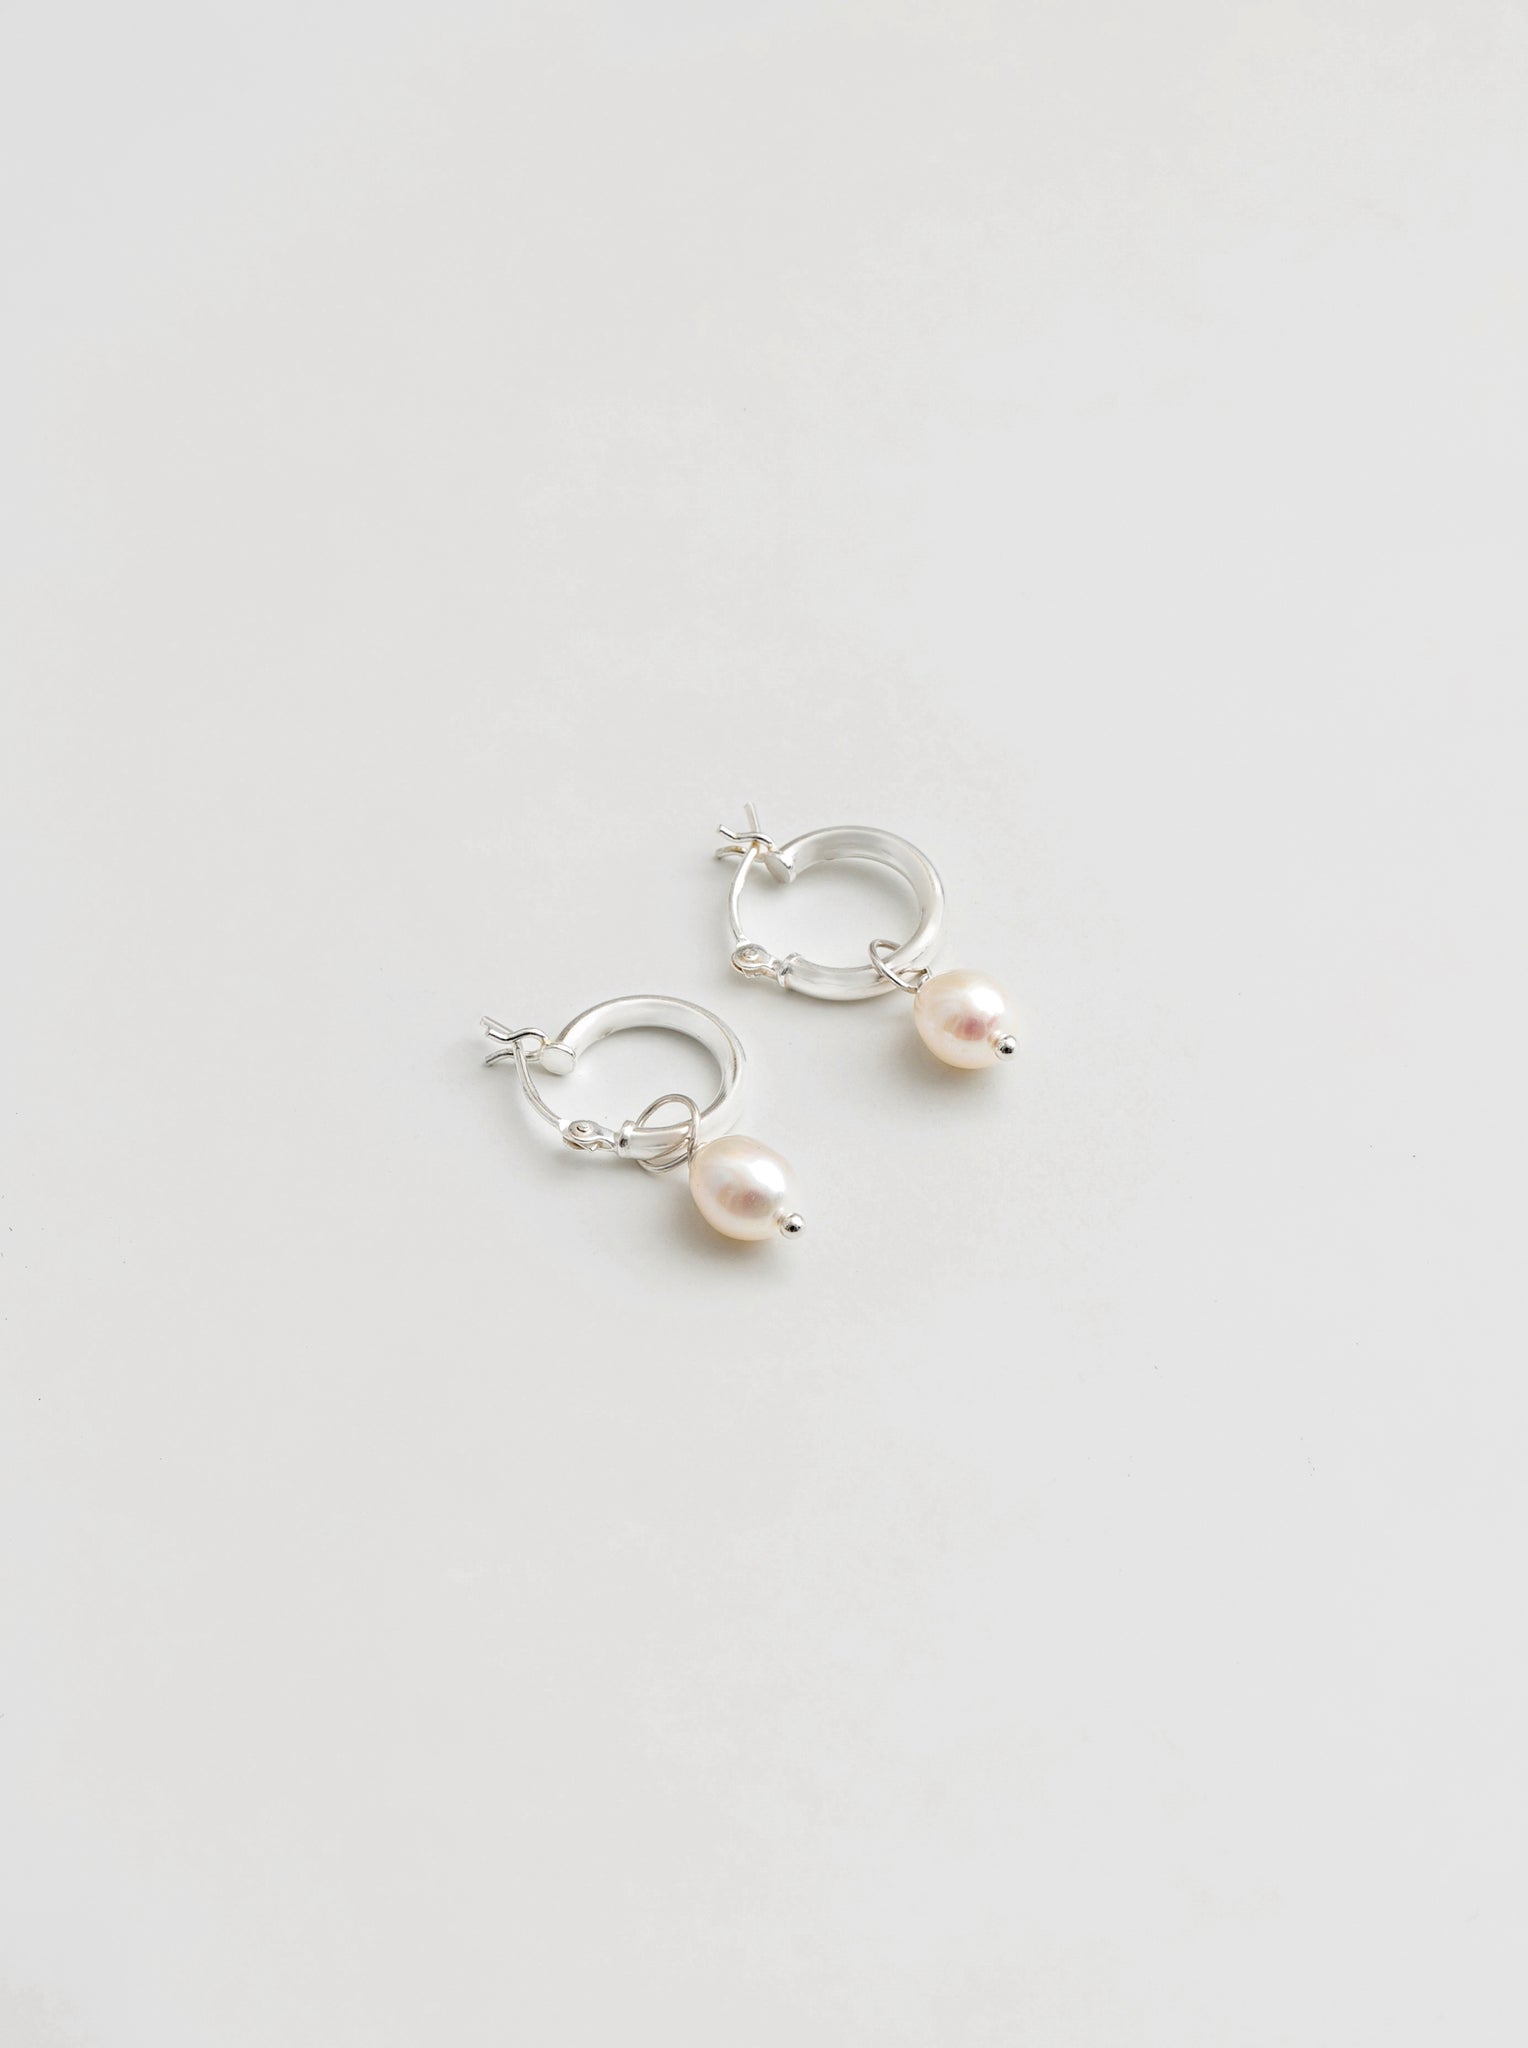 Small Pearl Hoops in Sterling Silver